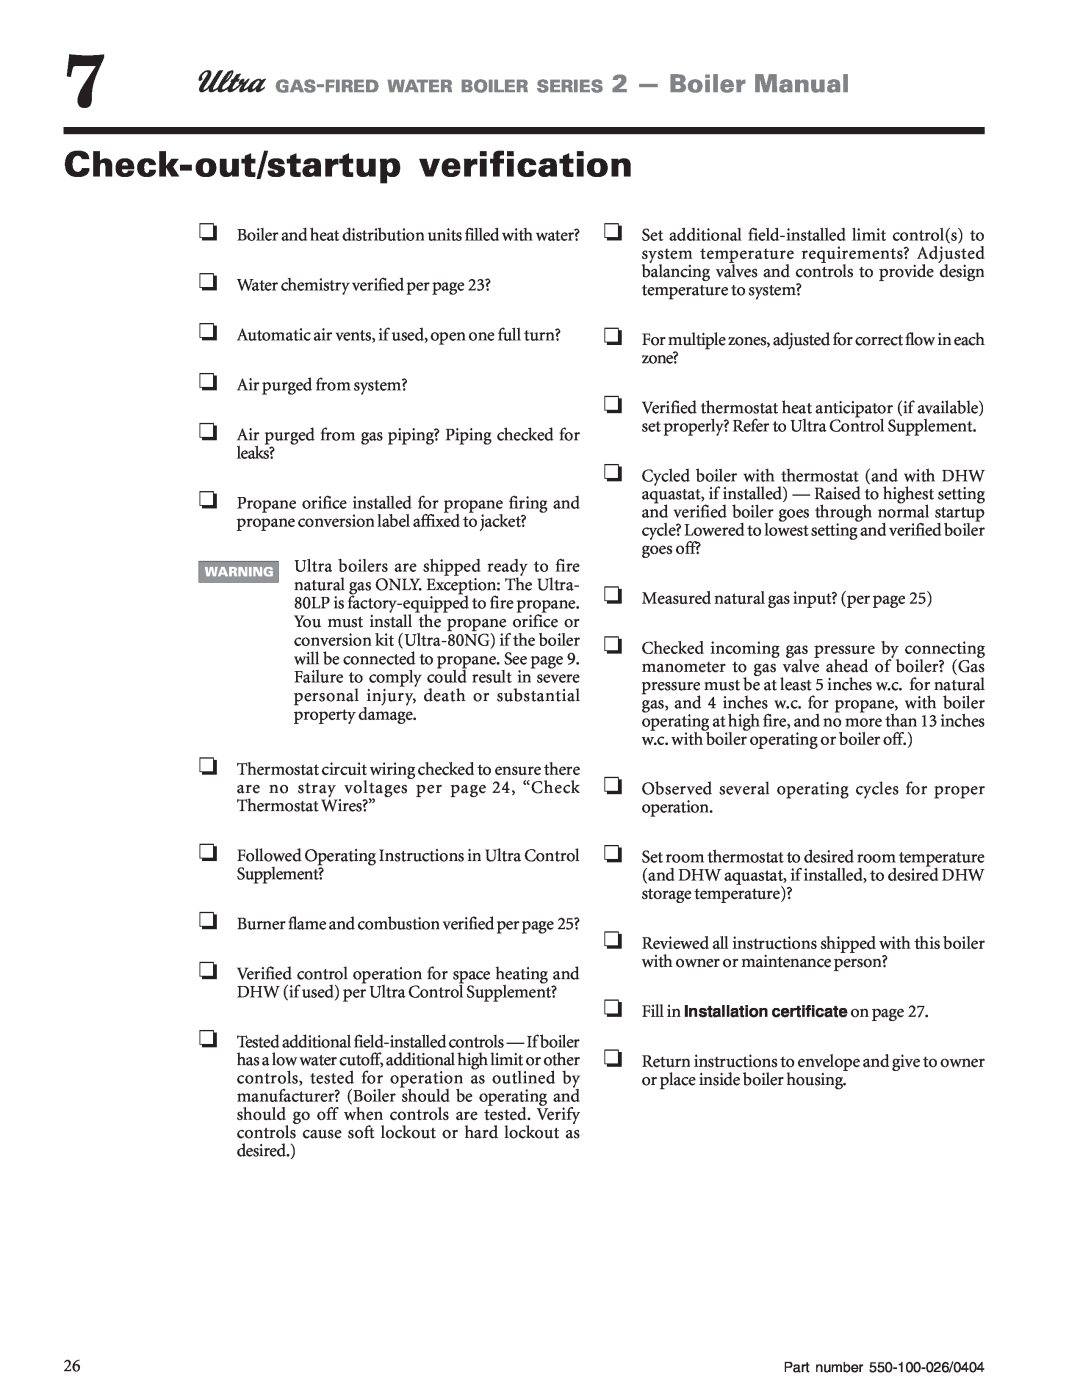 Ultra electronic 230 & -310, 105, 80, 155 manual Check-out/startupverification, GAS-FIREDWATER BOILER SERIES 2 - Boiler Manual 